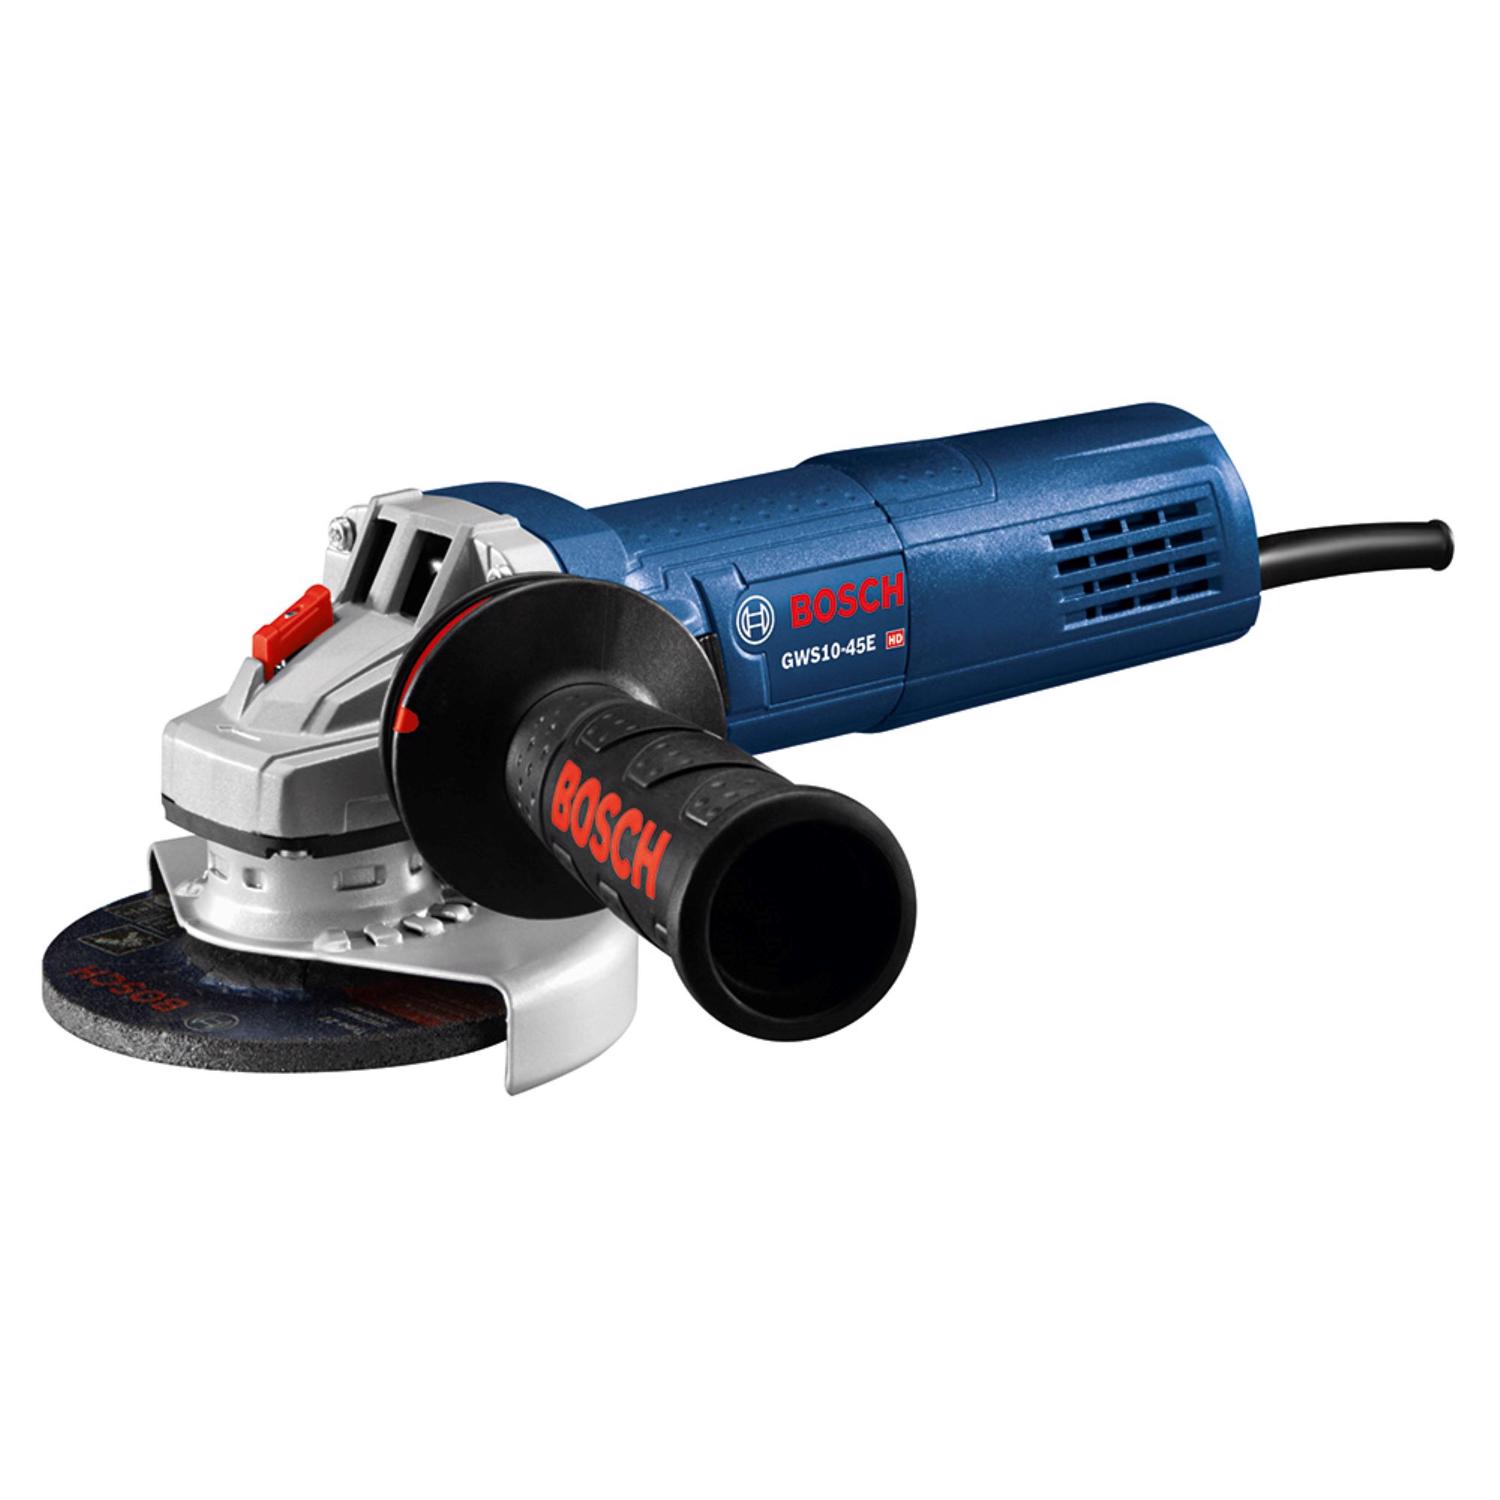 Photos - Grinder / Polisher Bosch 10 amps Corded 4-1/2 in. Angle Grinder GWS10-450P 